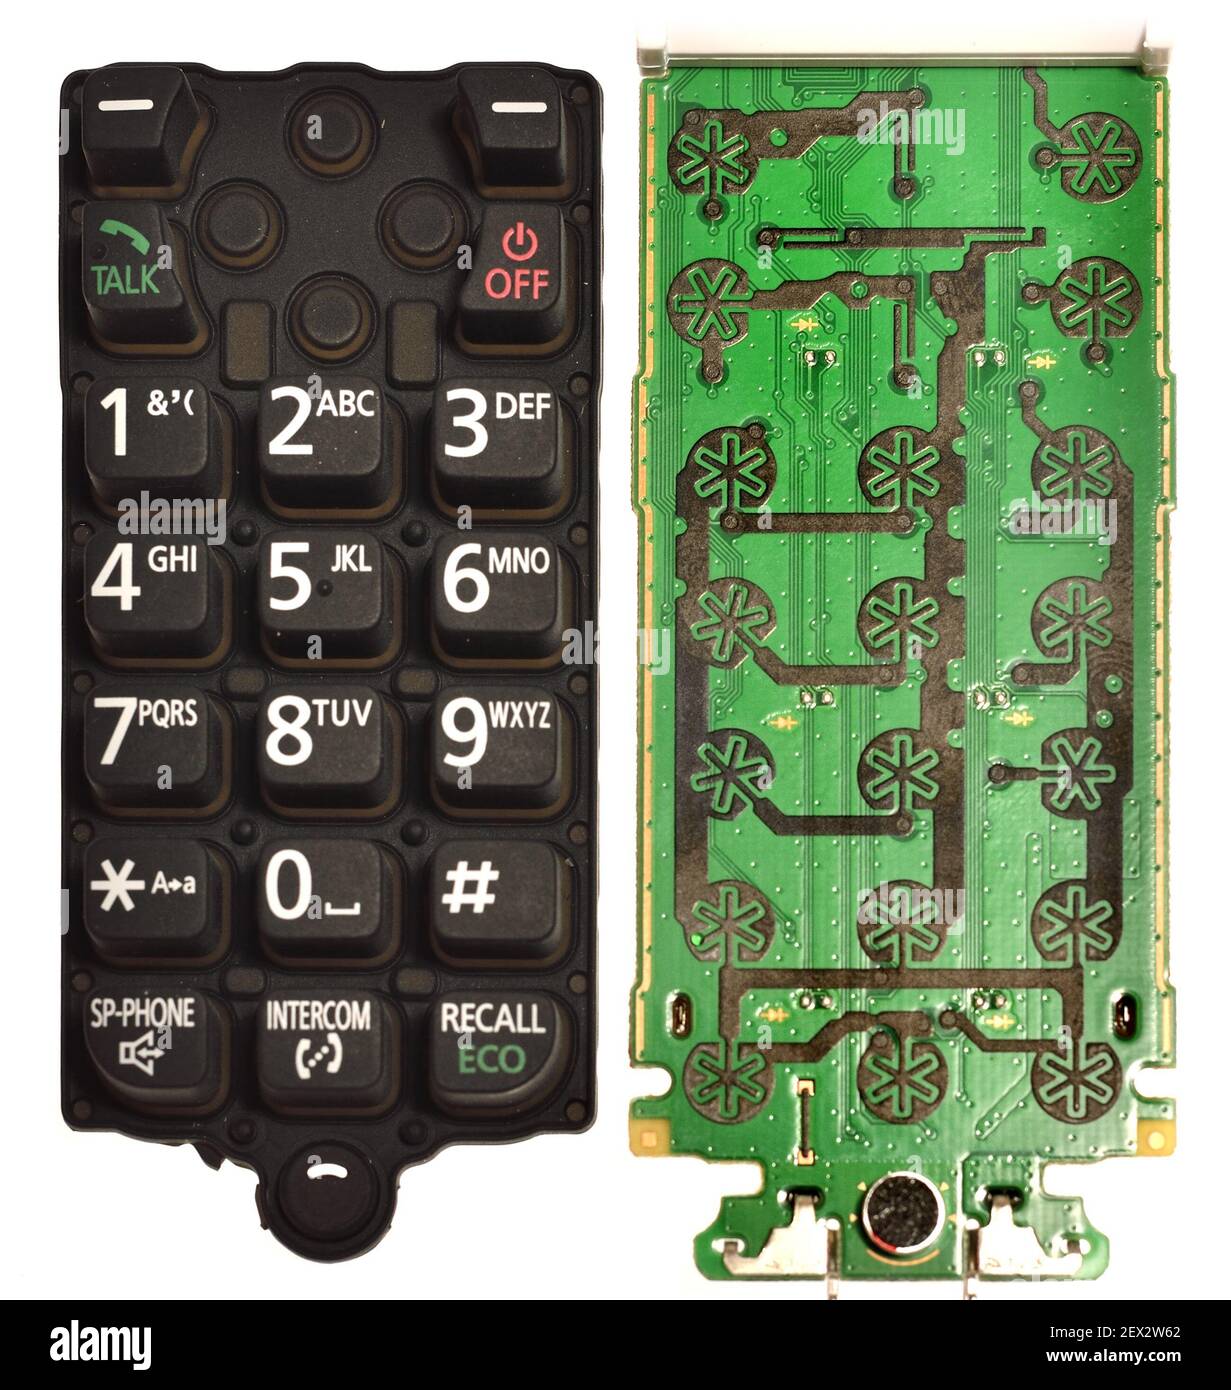 Mobile phone keypad removed to show the contacts on a circuitboard underneath Stock Photo